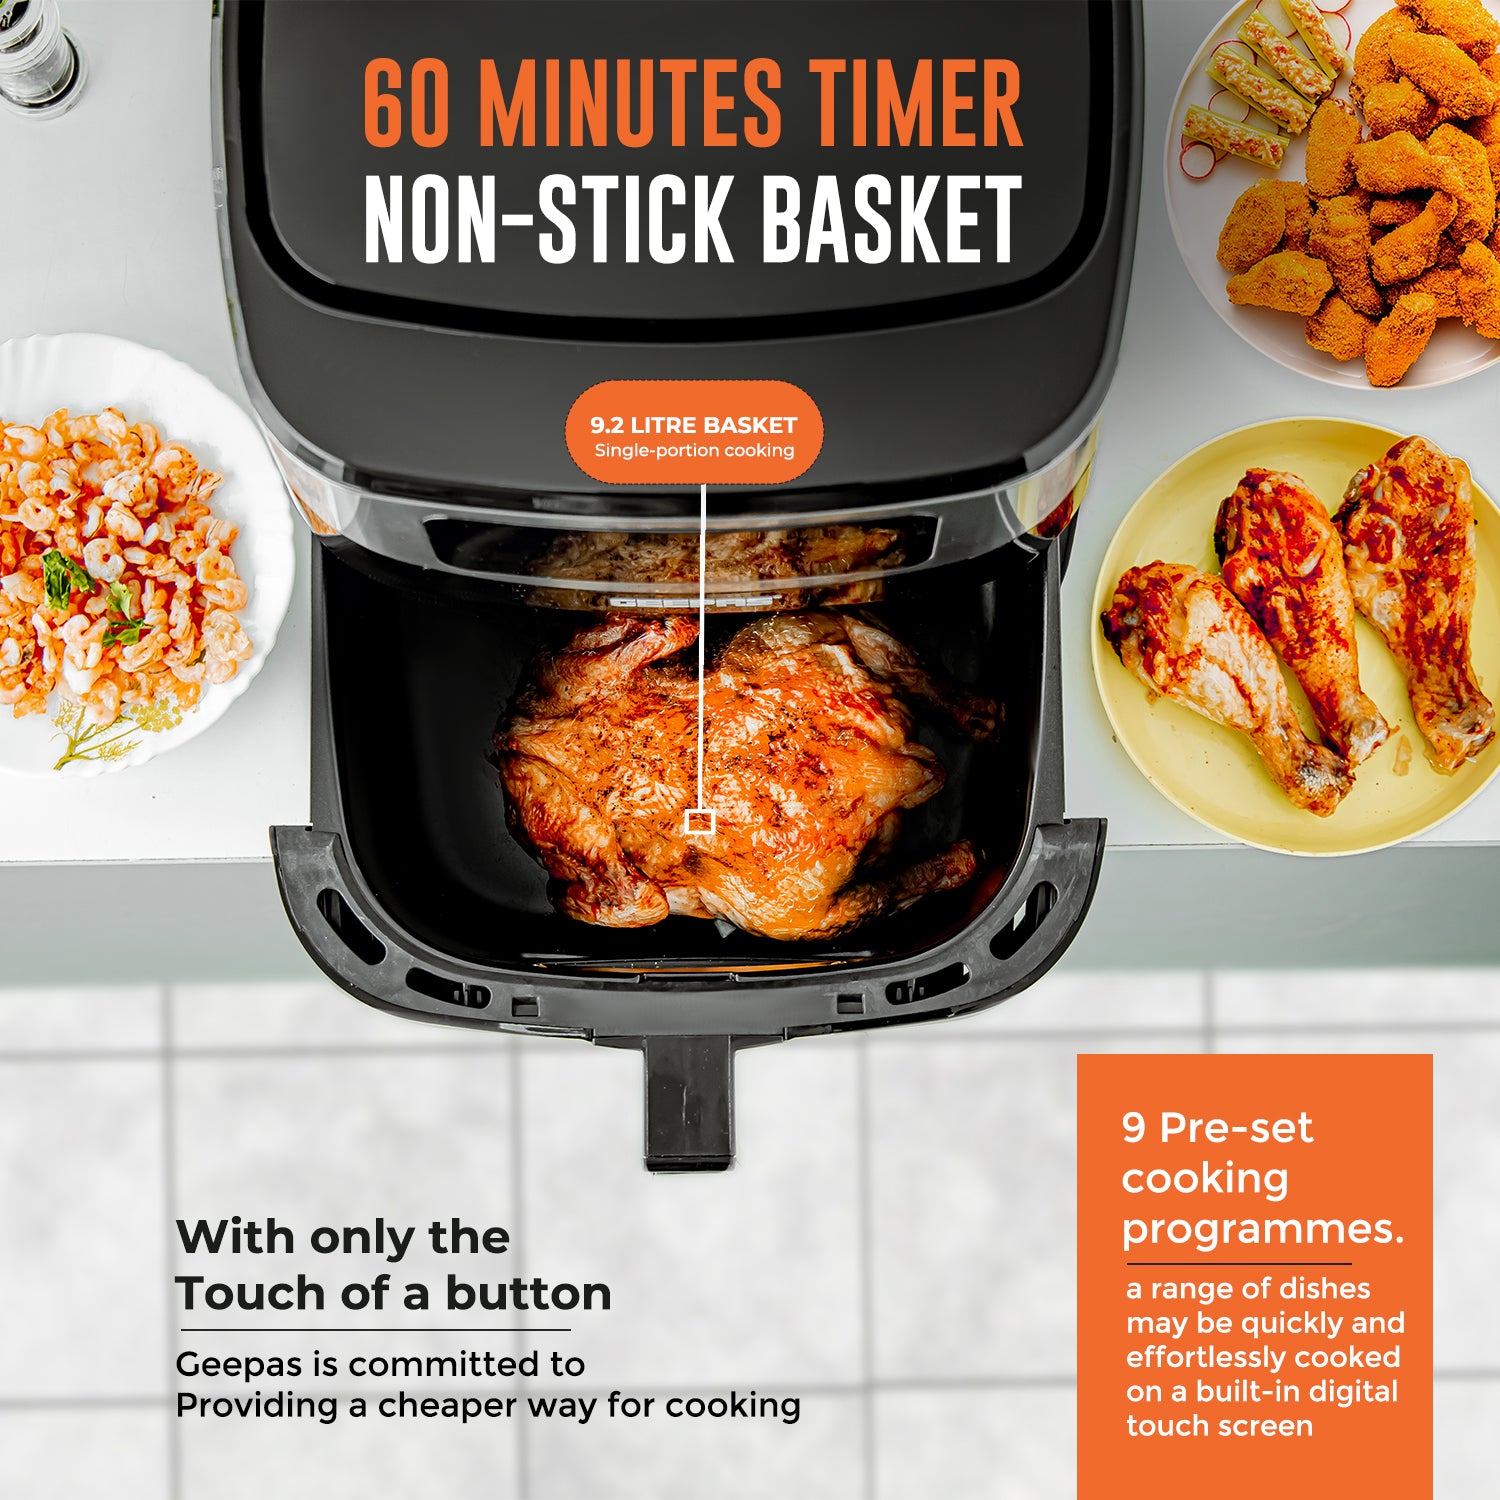 Image showing of the 60 minute timer on the 9.2 litre digital air fryer. It also shows the non-stick air frying basket of the air fryer.